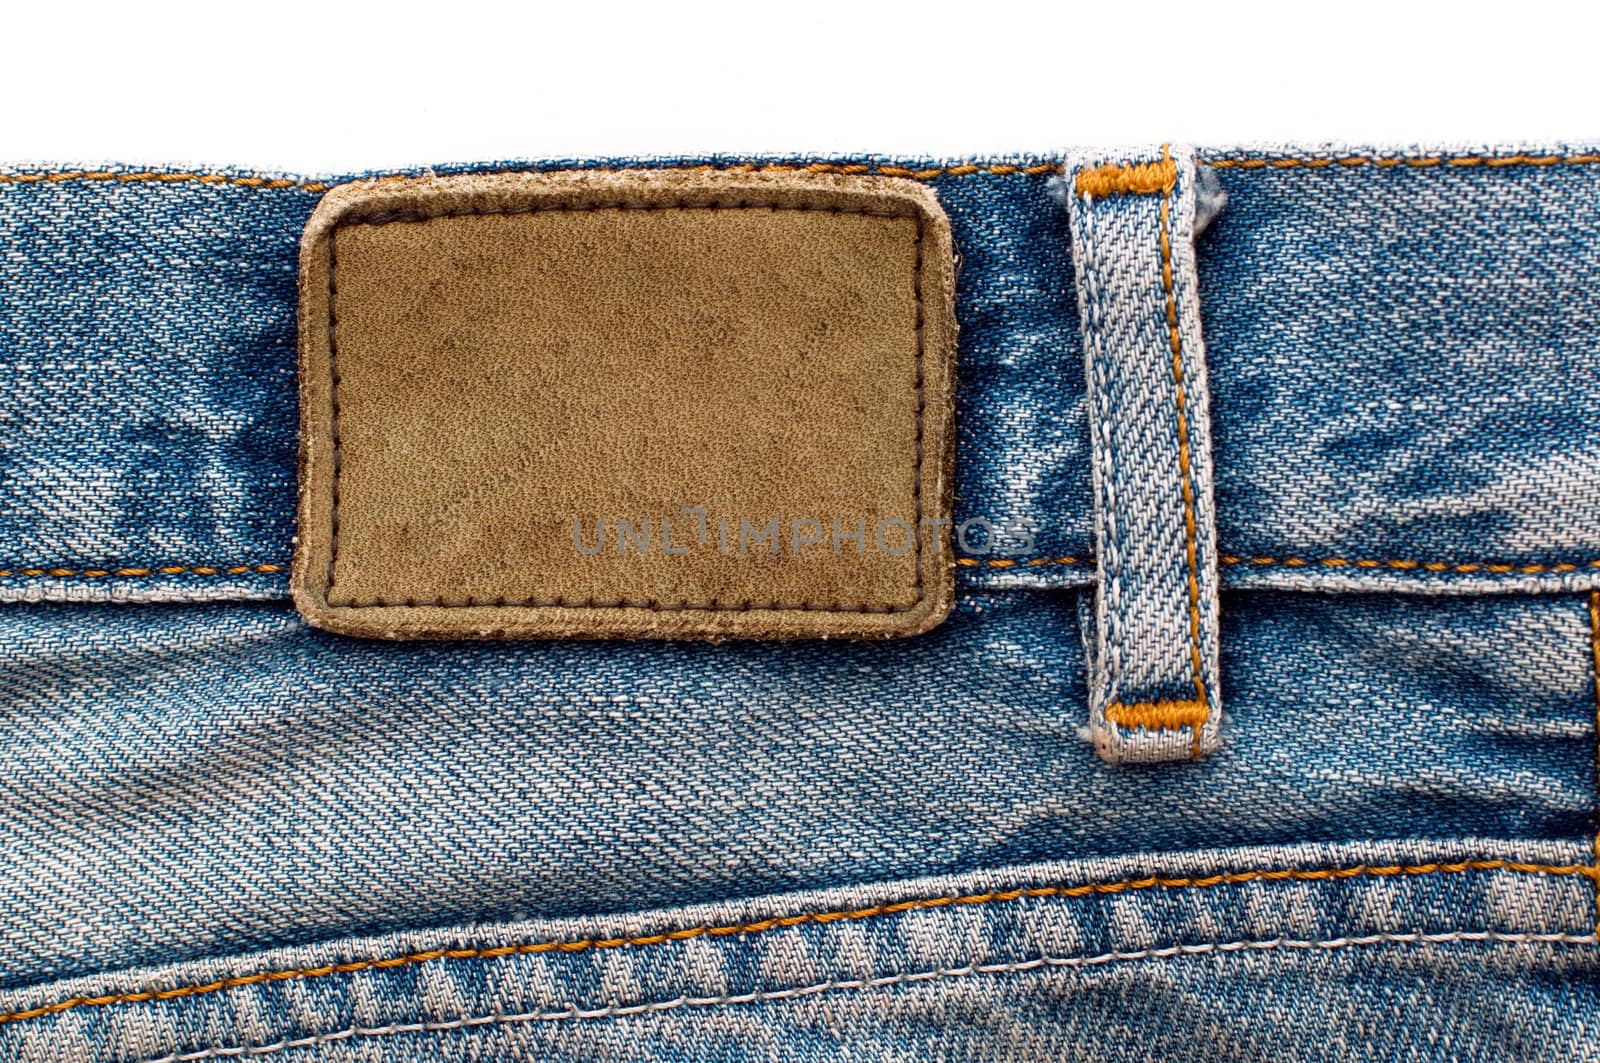 Blank leather jeans label sewed on a blue jeans